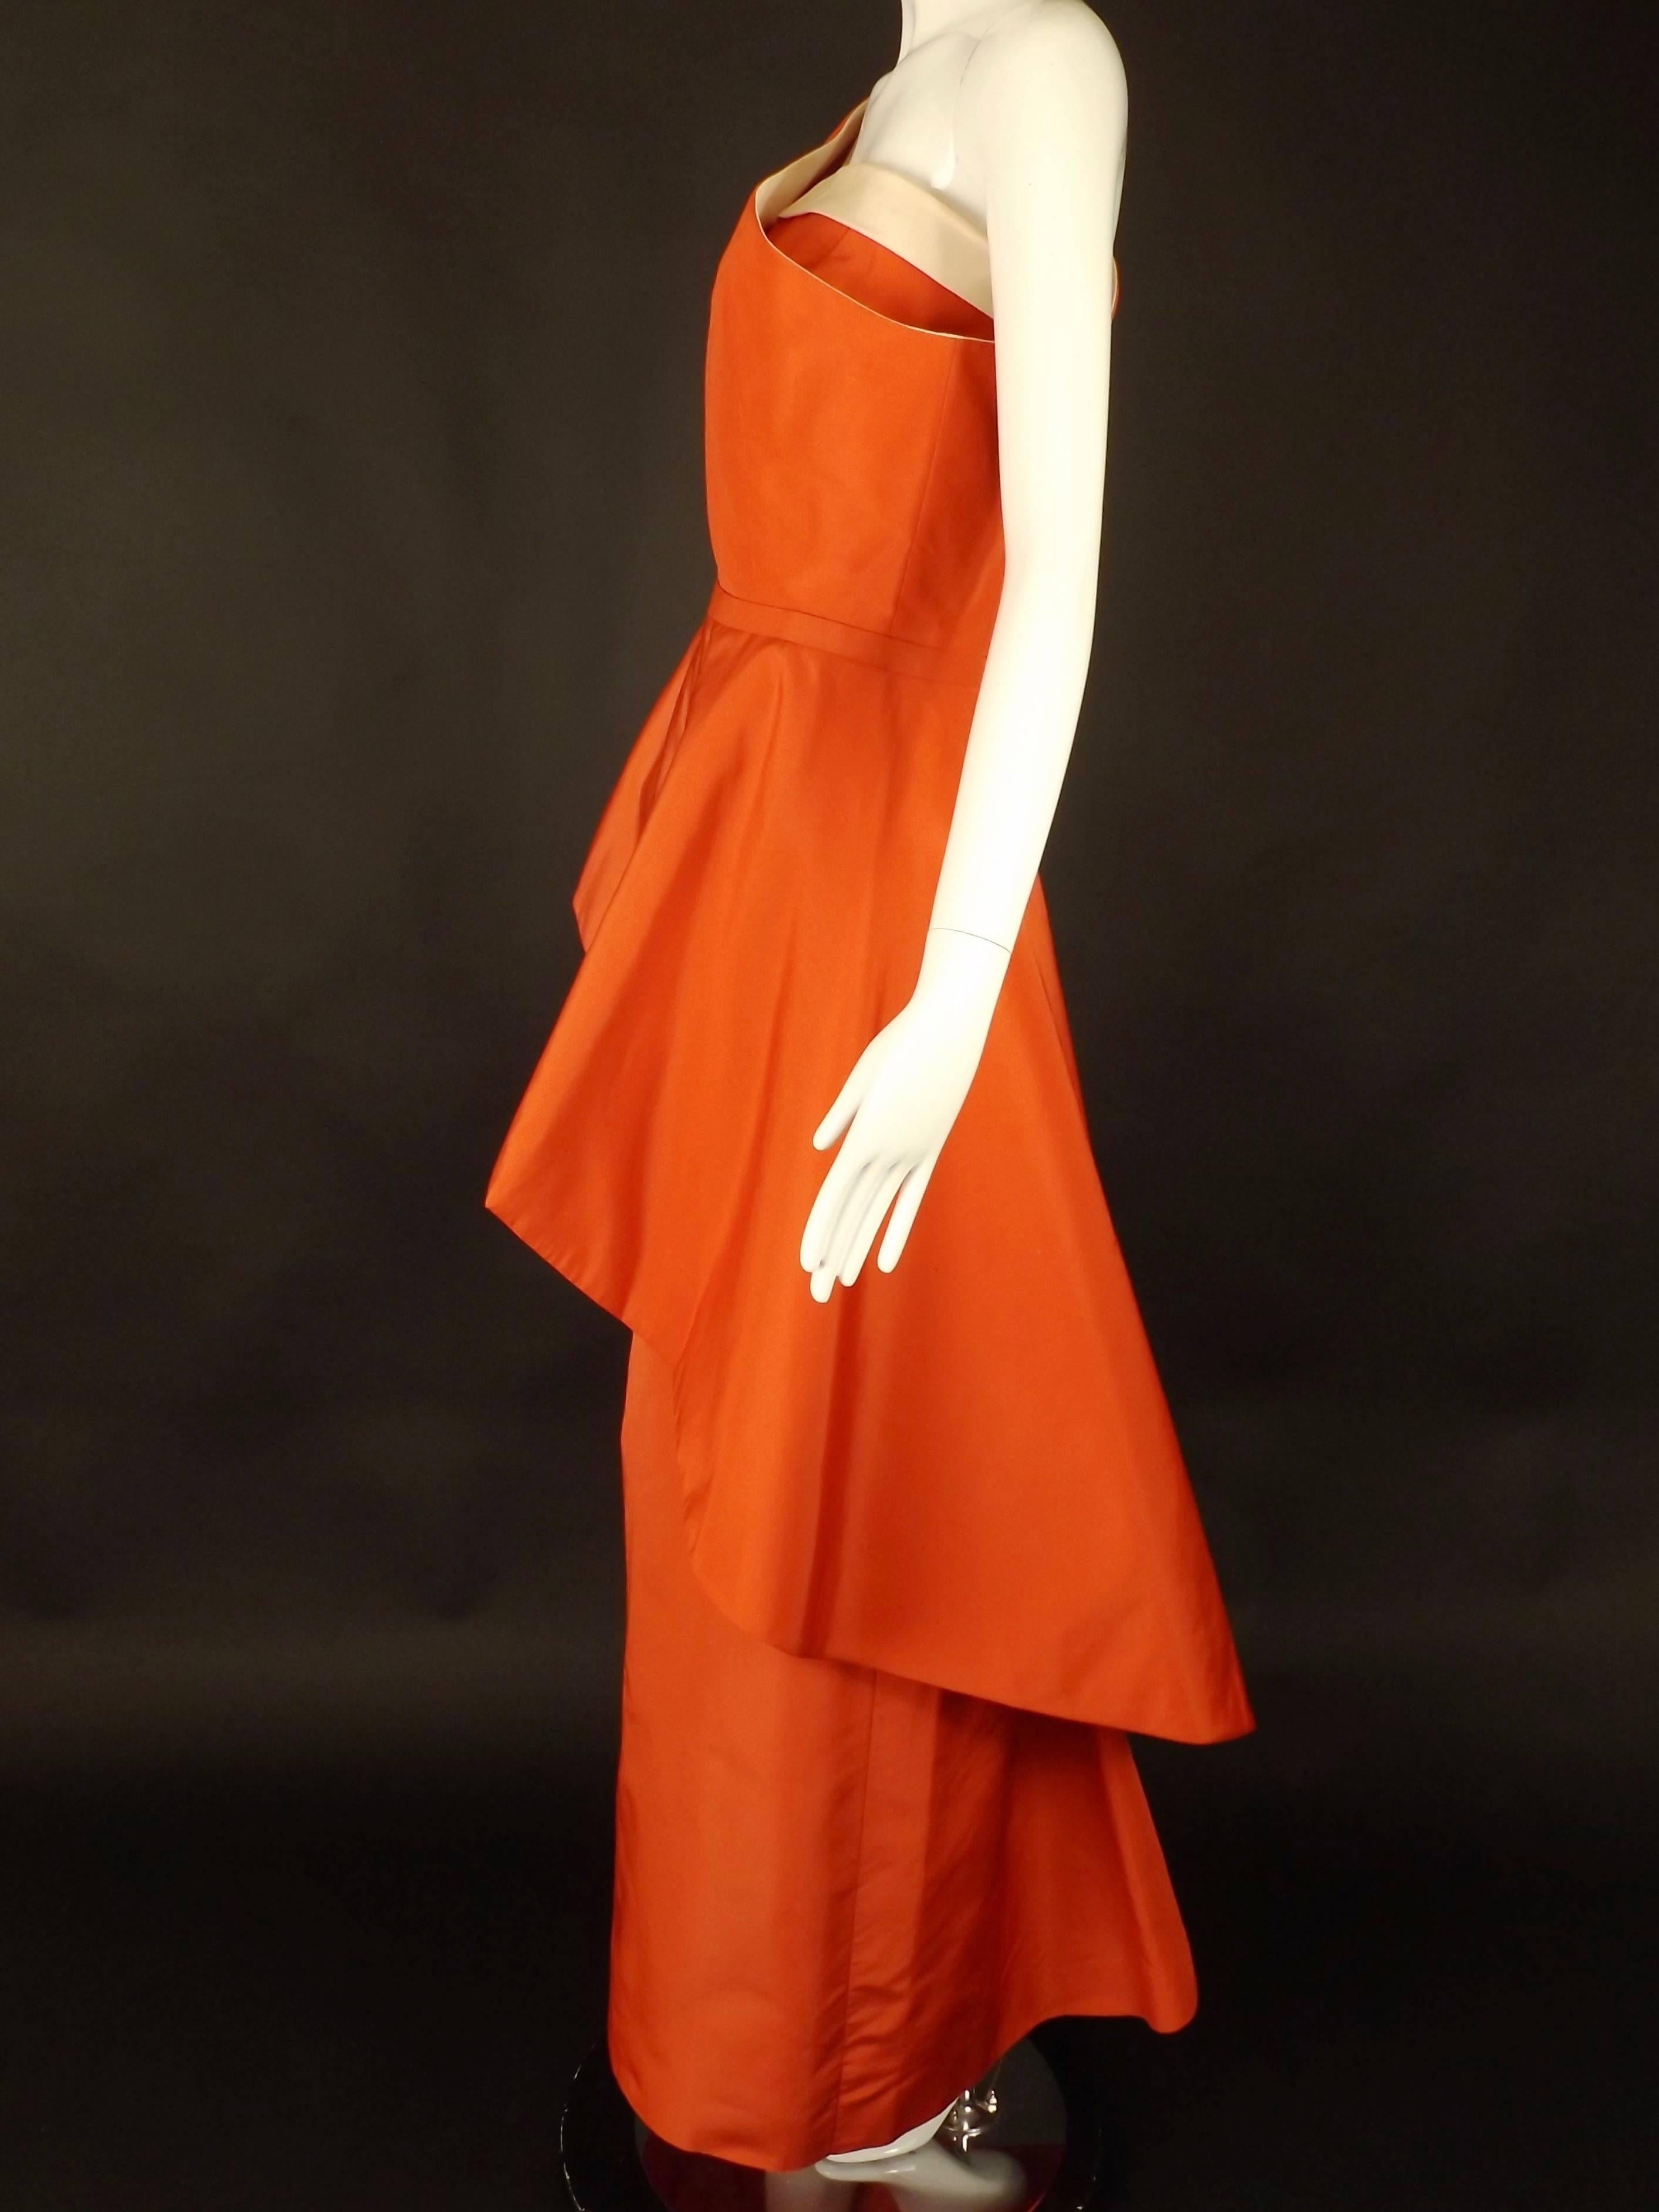 This is a stunning evening gown from the late 1950s/early 1960s in a dark salmon, almost red silk twill by the Fontana sisters. I have not been able to find any reference to this gown online or in any books. How exciting! The gown has a dart fitted,